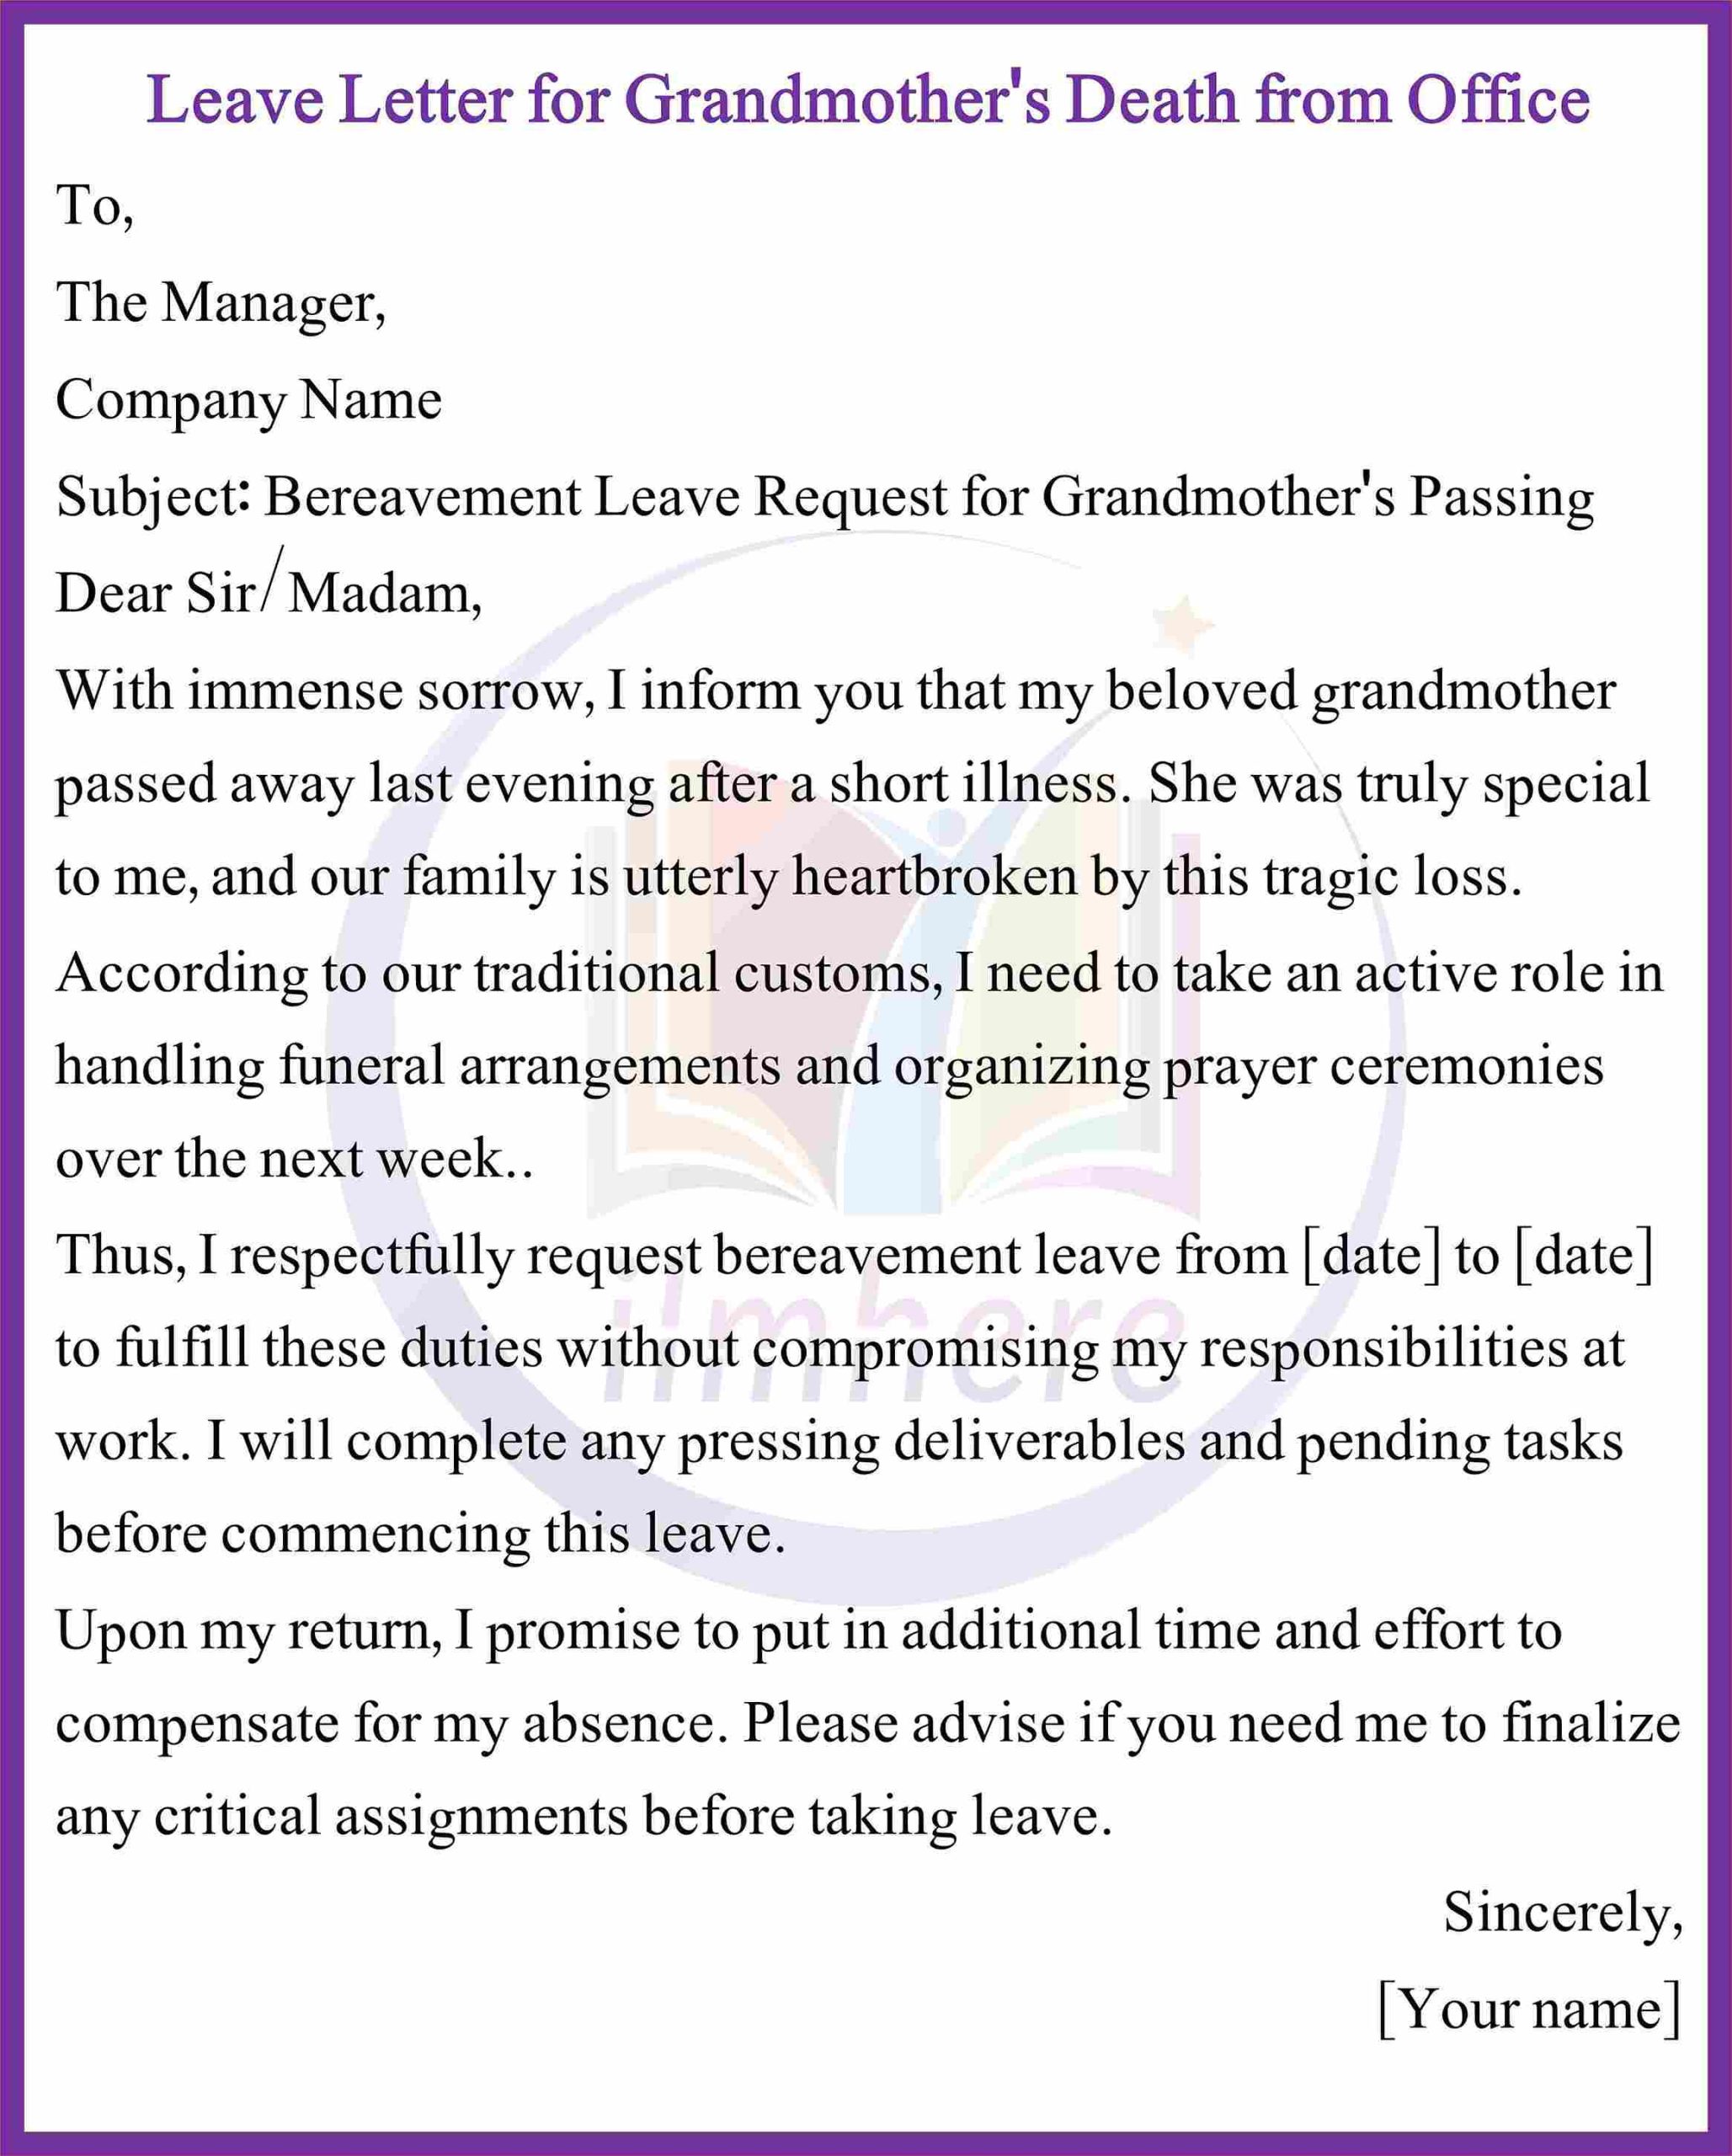 Leave Letter for Grandmother's Death from Office